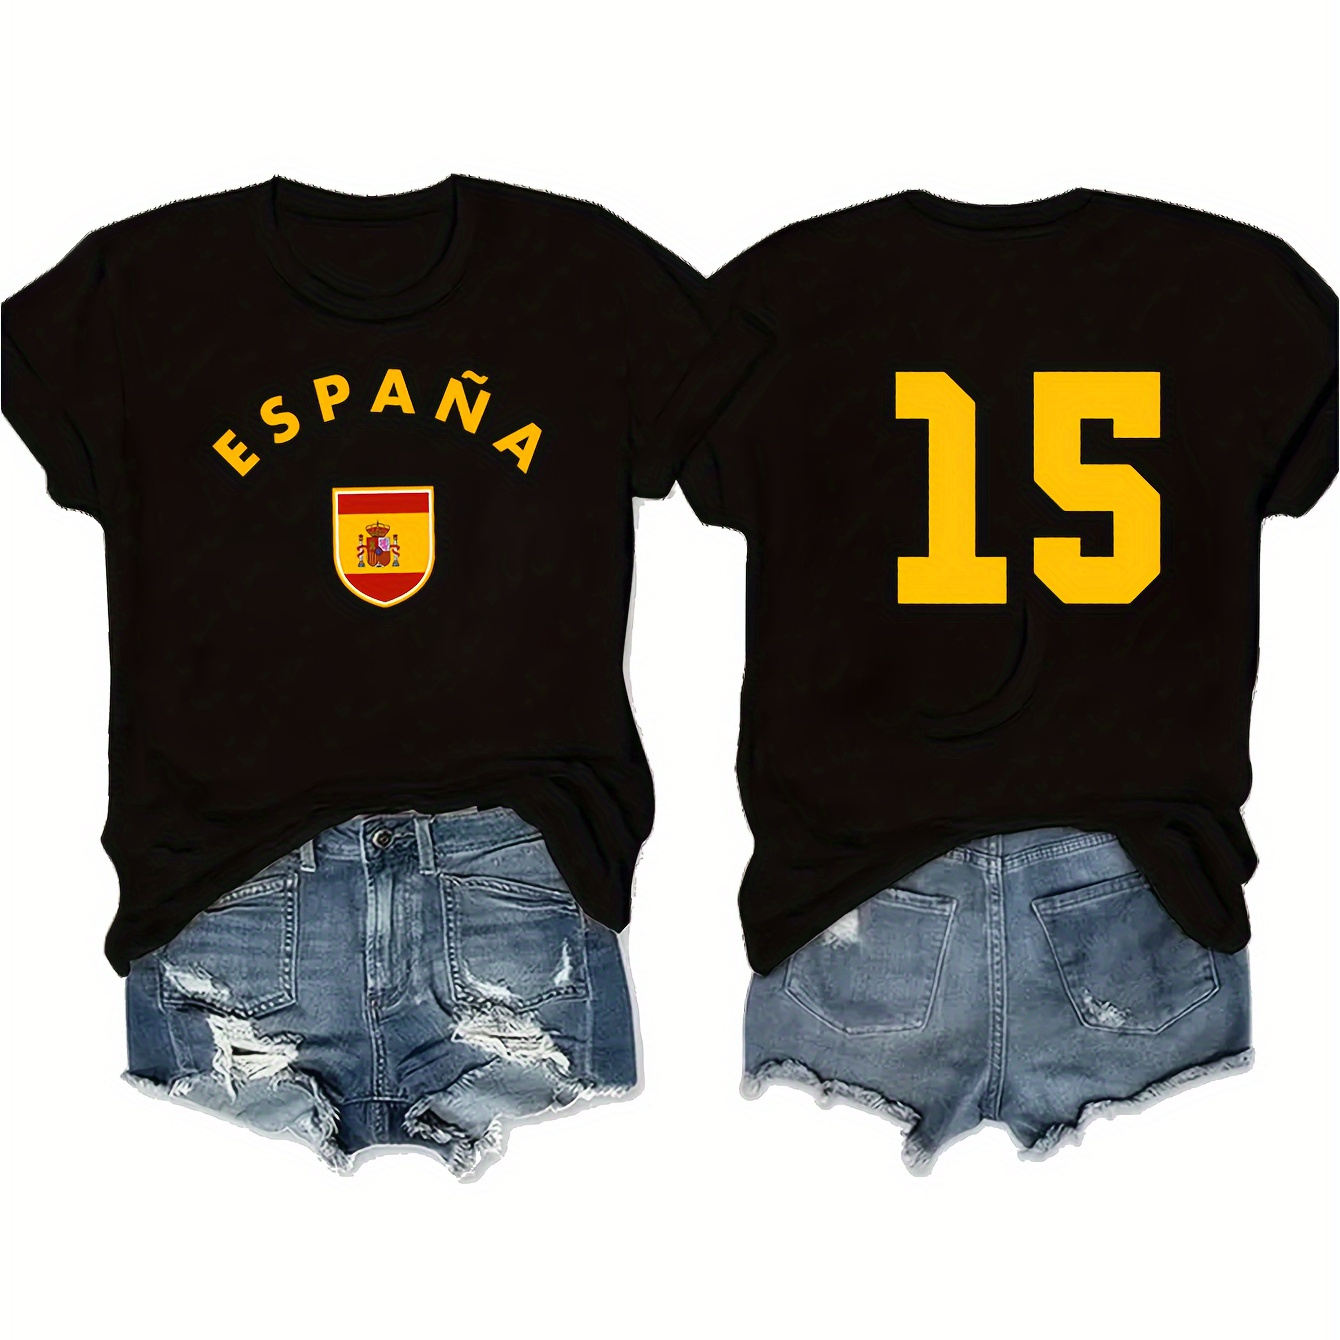 

Spain Soccer Number 15 Print Casual T-shirt, Crew Neck Short Sleeves Comfy Tops, Women's Activewear